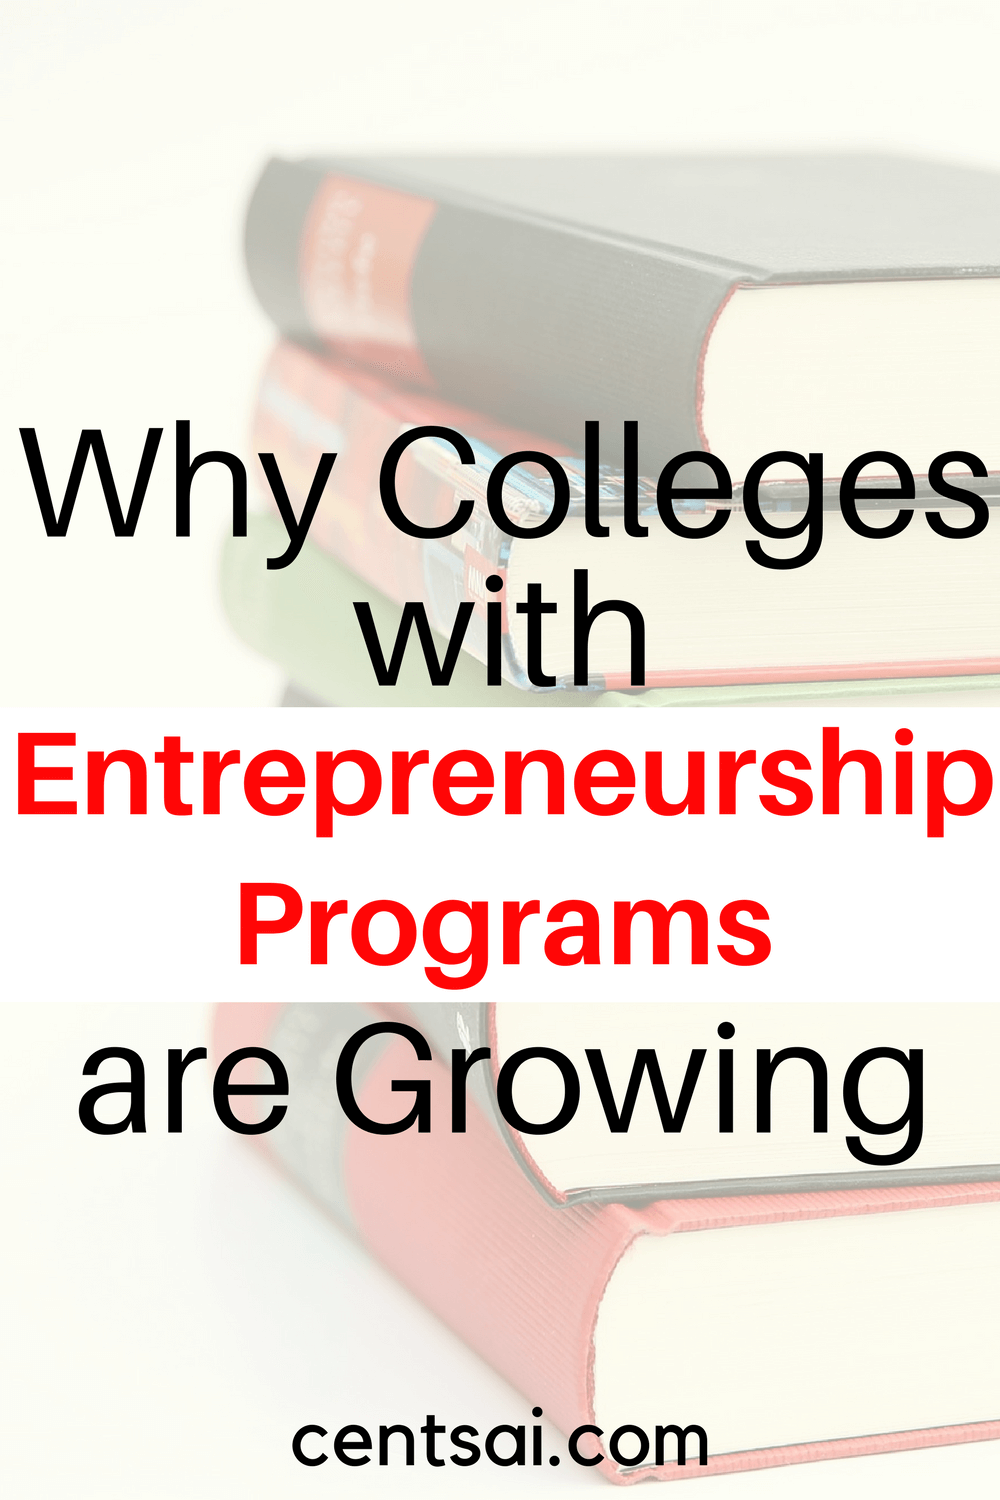 There are some colleges out there that are upping their game with entrepreneurship programs – not just providing the average degree.